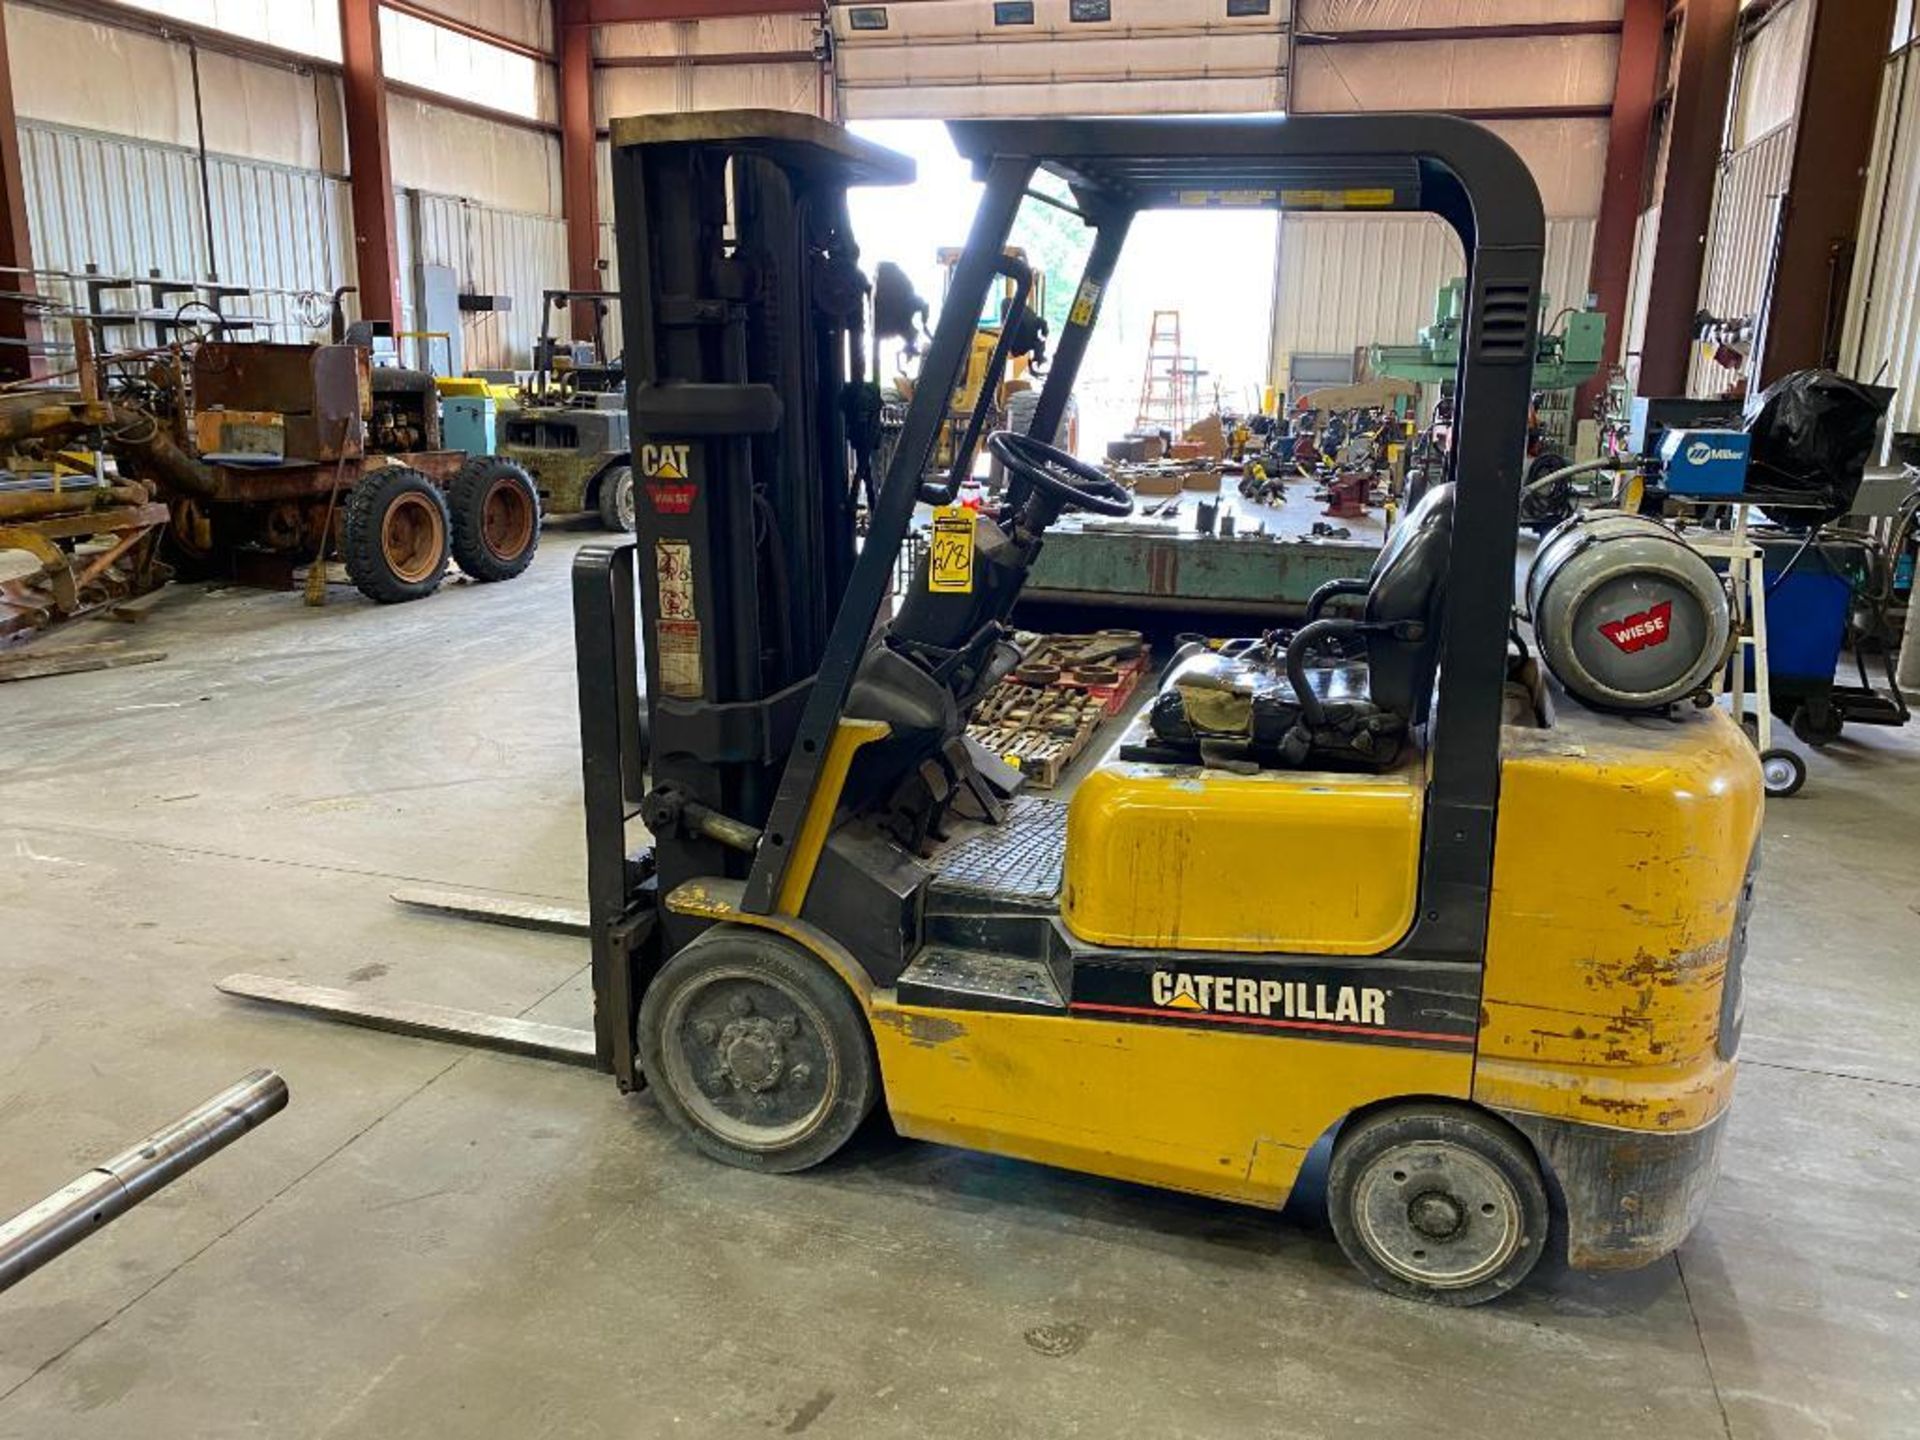 Caterpillar 5,000-LB. Capacity Forklift, Model GC25K, S/N AT82C06759, LPG, Solid Tires, 3-Stage Mast